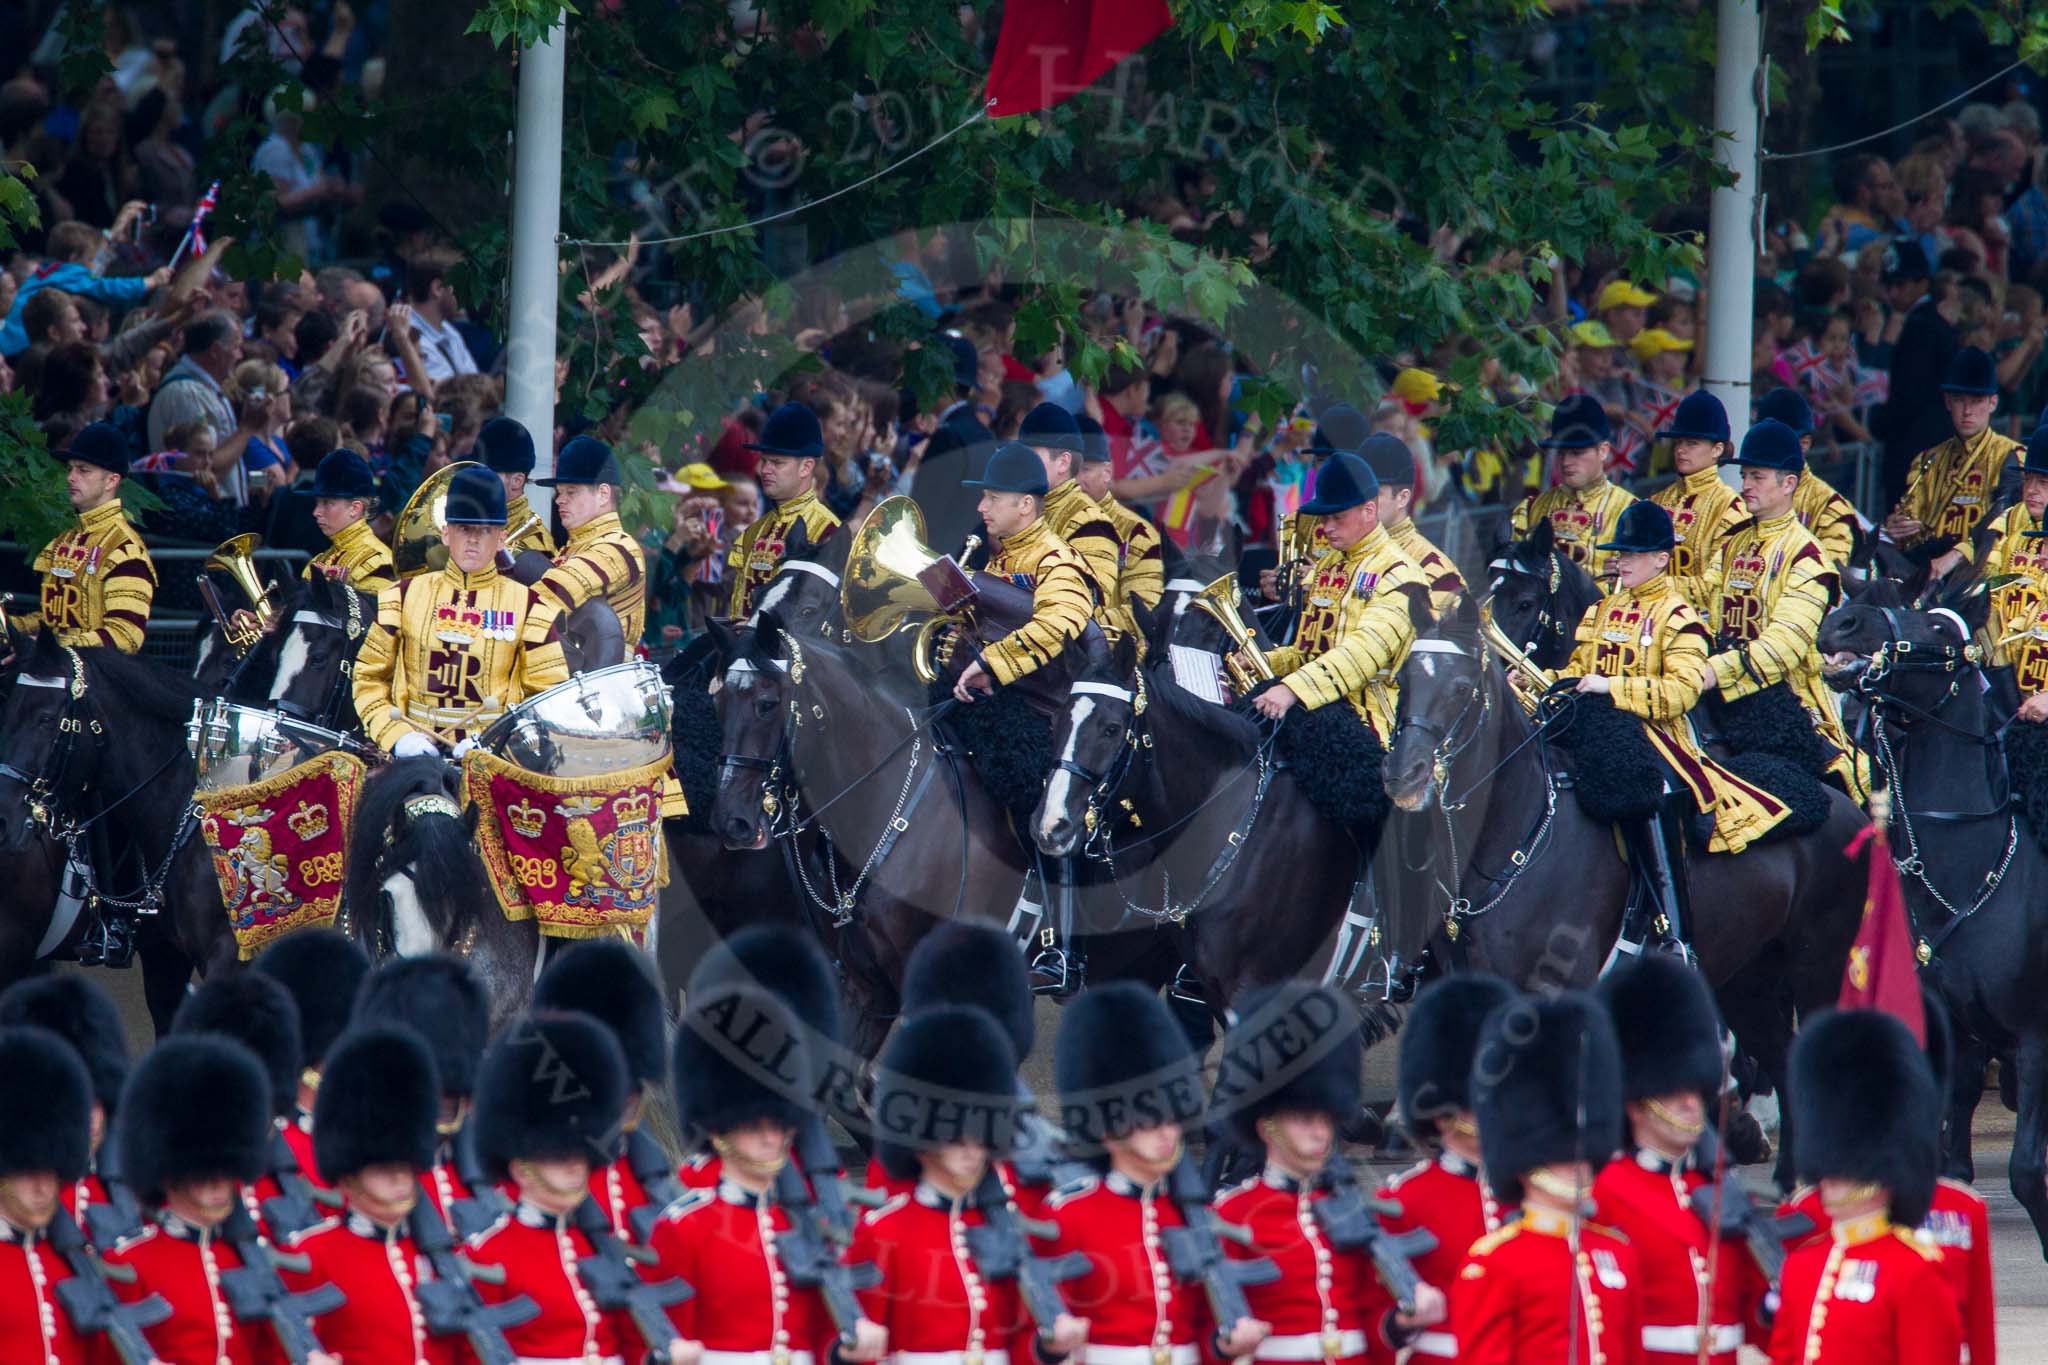 Trooping the Colour 2014.
Horse Guards Parade, Westminster,
London SW1A,

United Kingdom,
on 14 June 2014 at 10:56, image #315